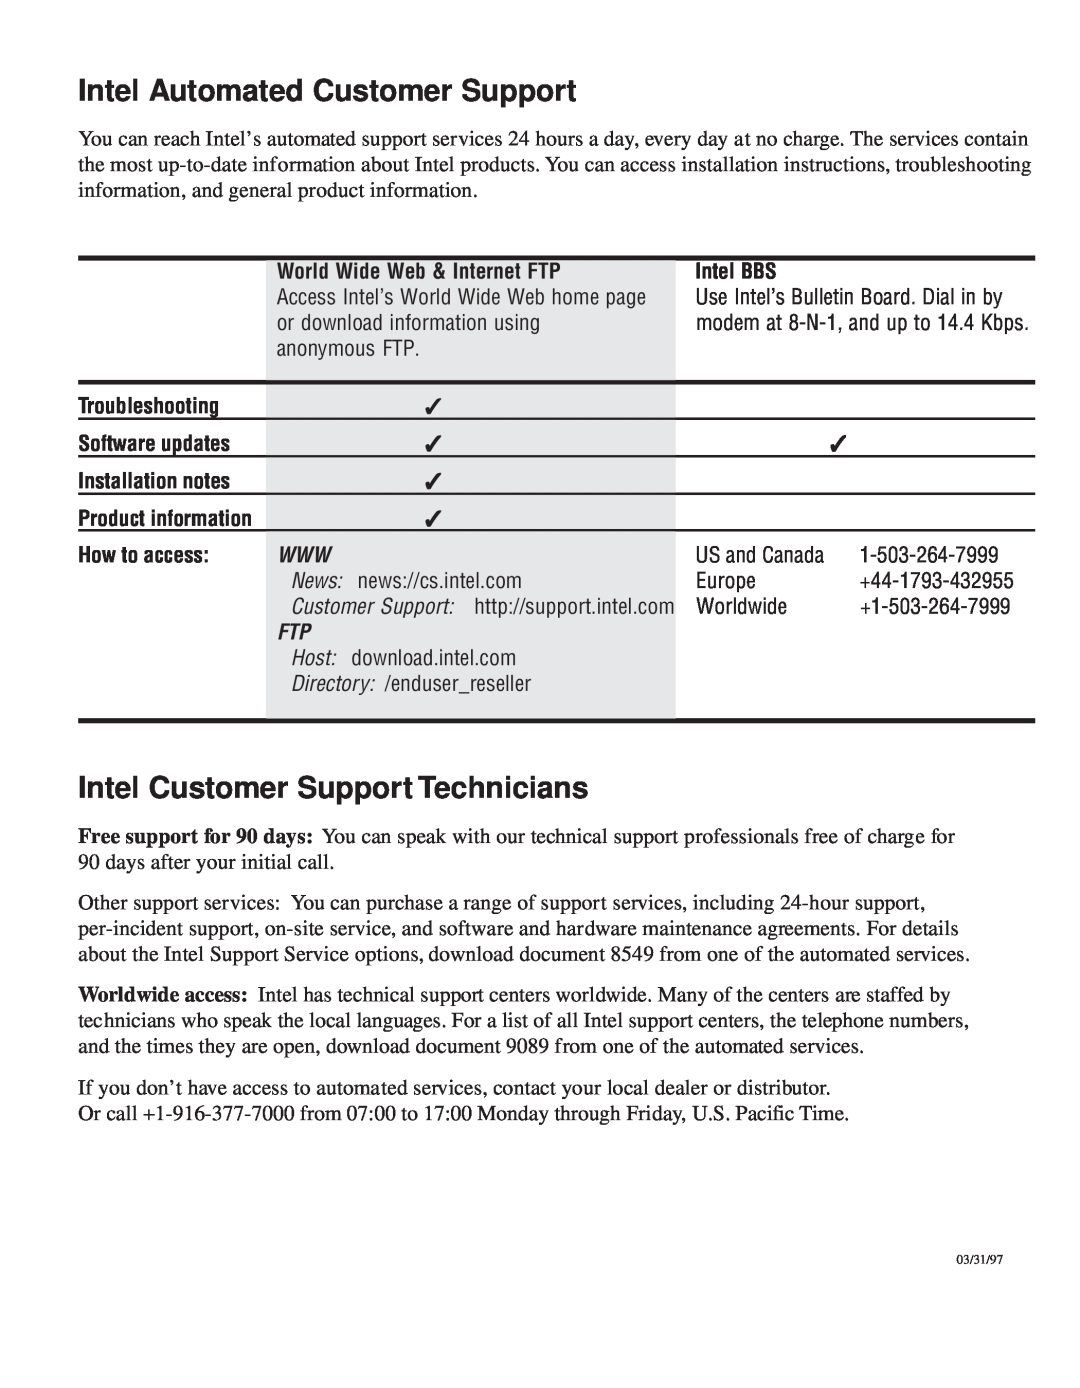 Intel EE110MM Intel Automated Customer Support, Intel Customer Support Technicians, World Wide Web & Internet FTP, News 